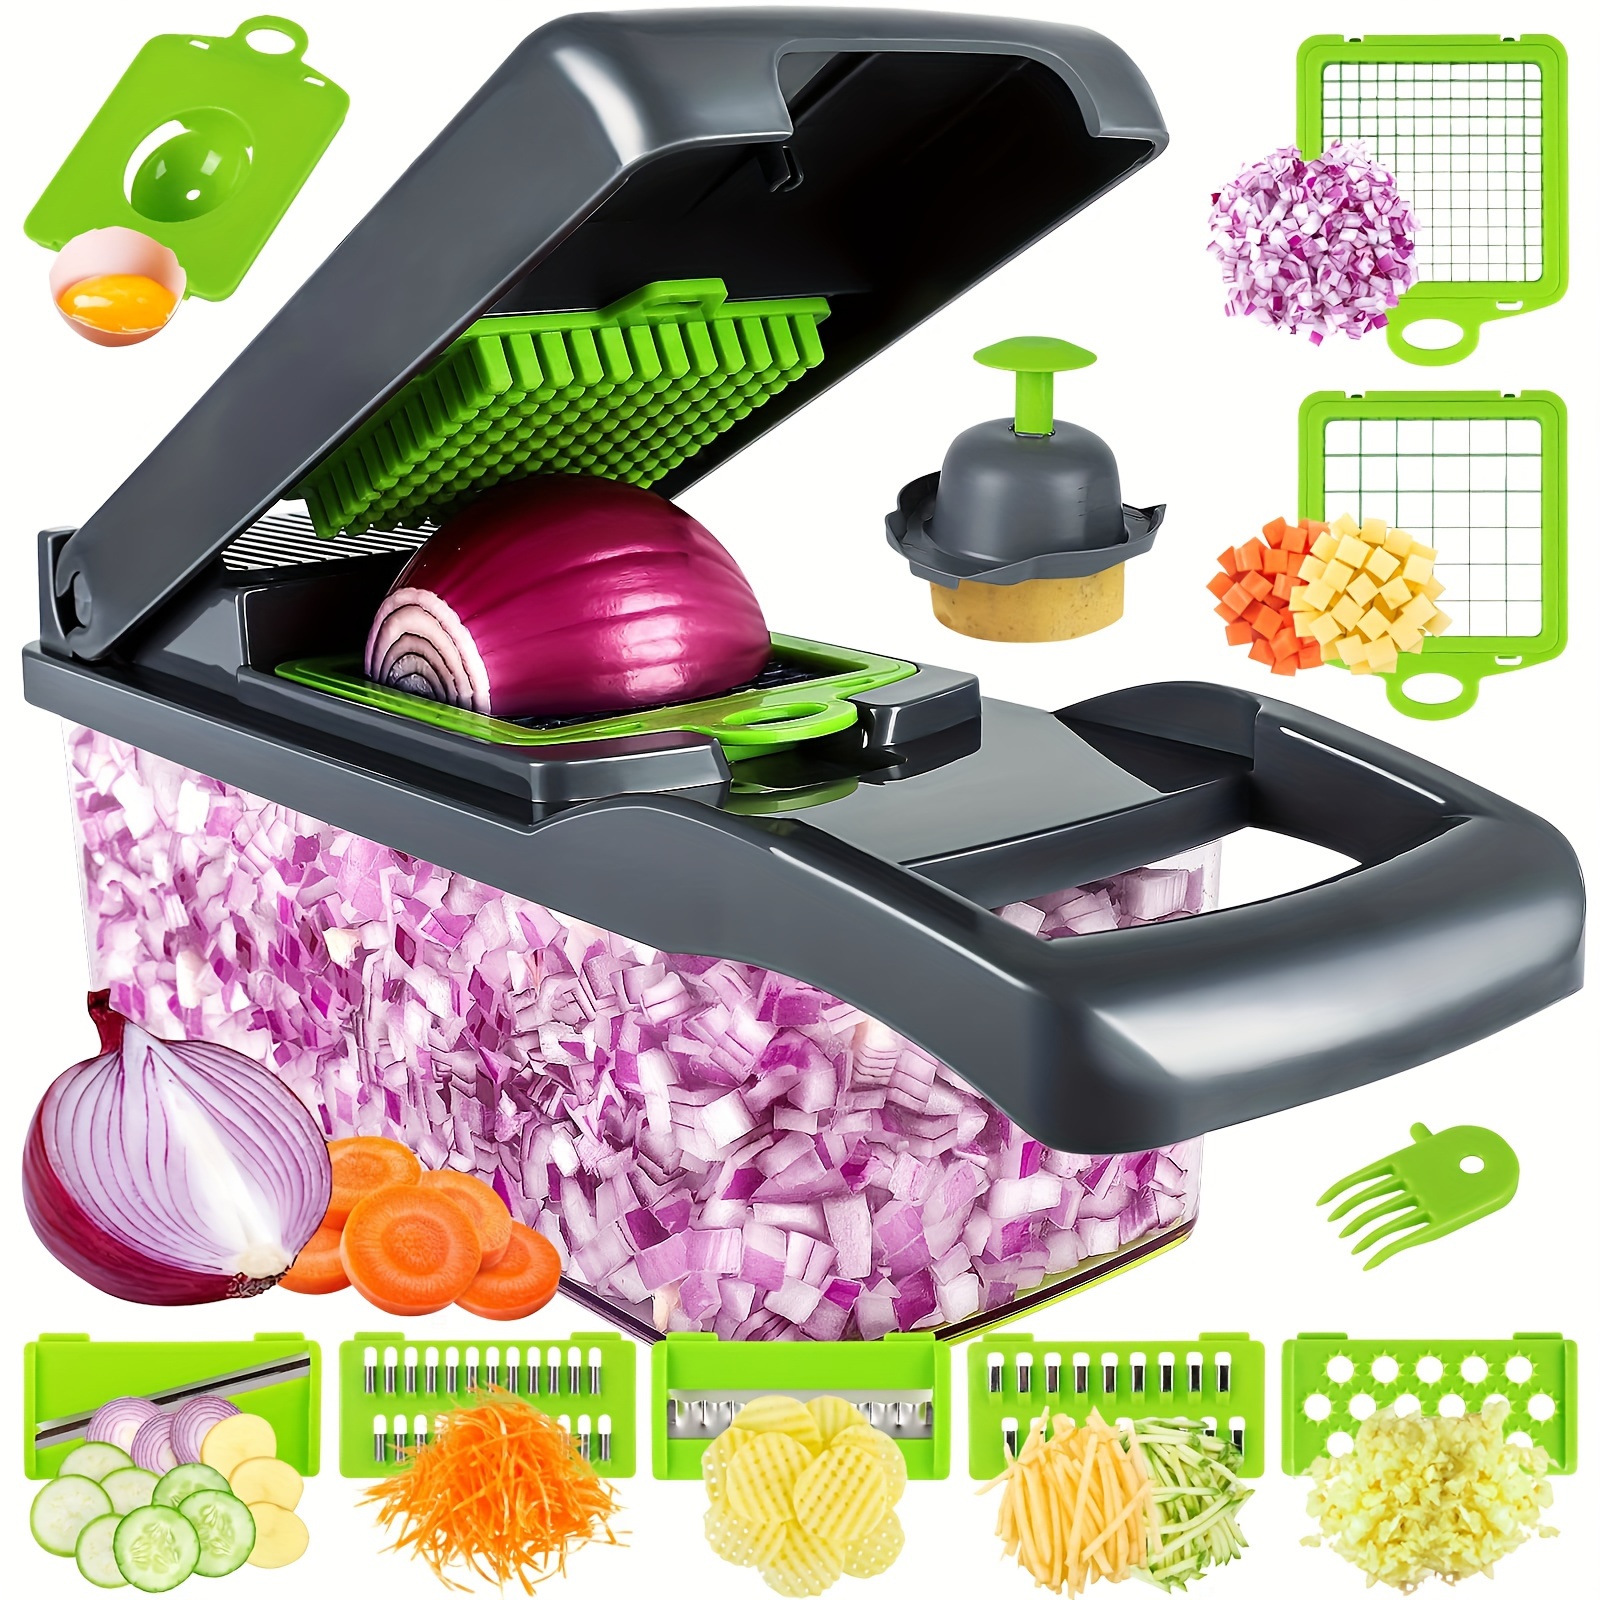 

Vegetable Chopper, Pro Onion Chopper, Multifunctional 13 In 1 Food Chopper, Kitchen Vegetable Slicer Dicer Cutter, Veggie Chopper With 8 Blades, Carrot And Garlic Chopper With Container